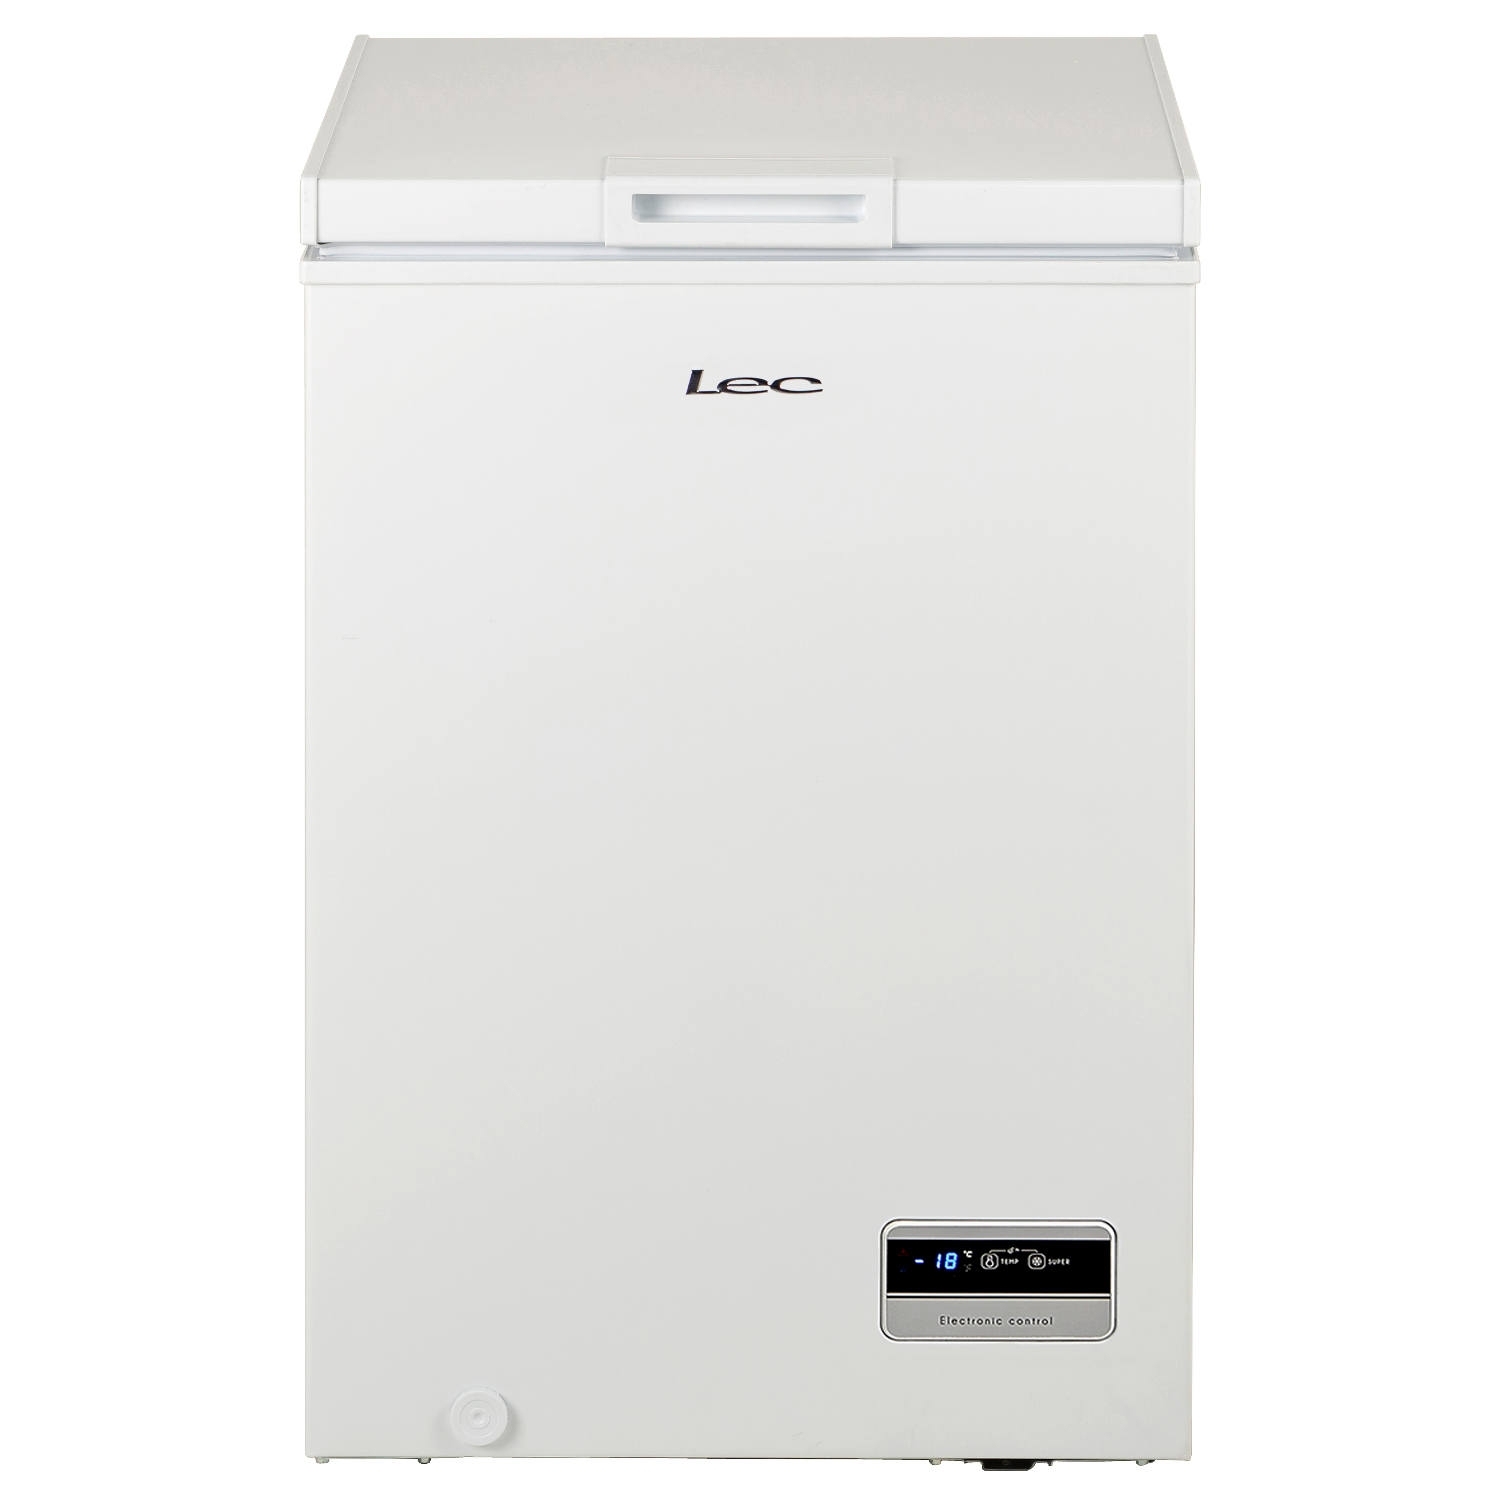 Lec 56.3cm Static Chest Freezer - White - A+ Energy Rated - 1